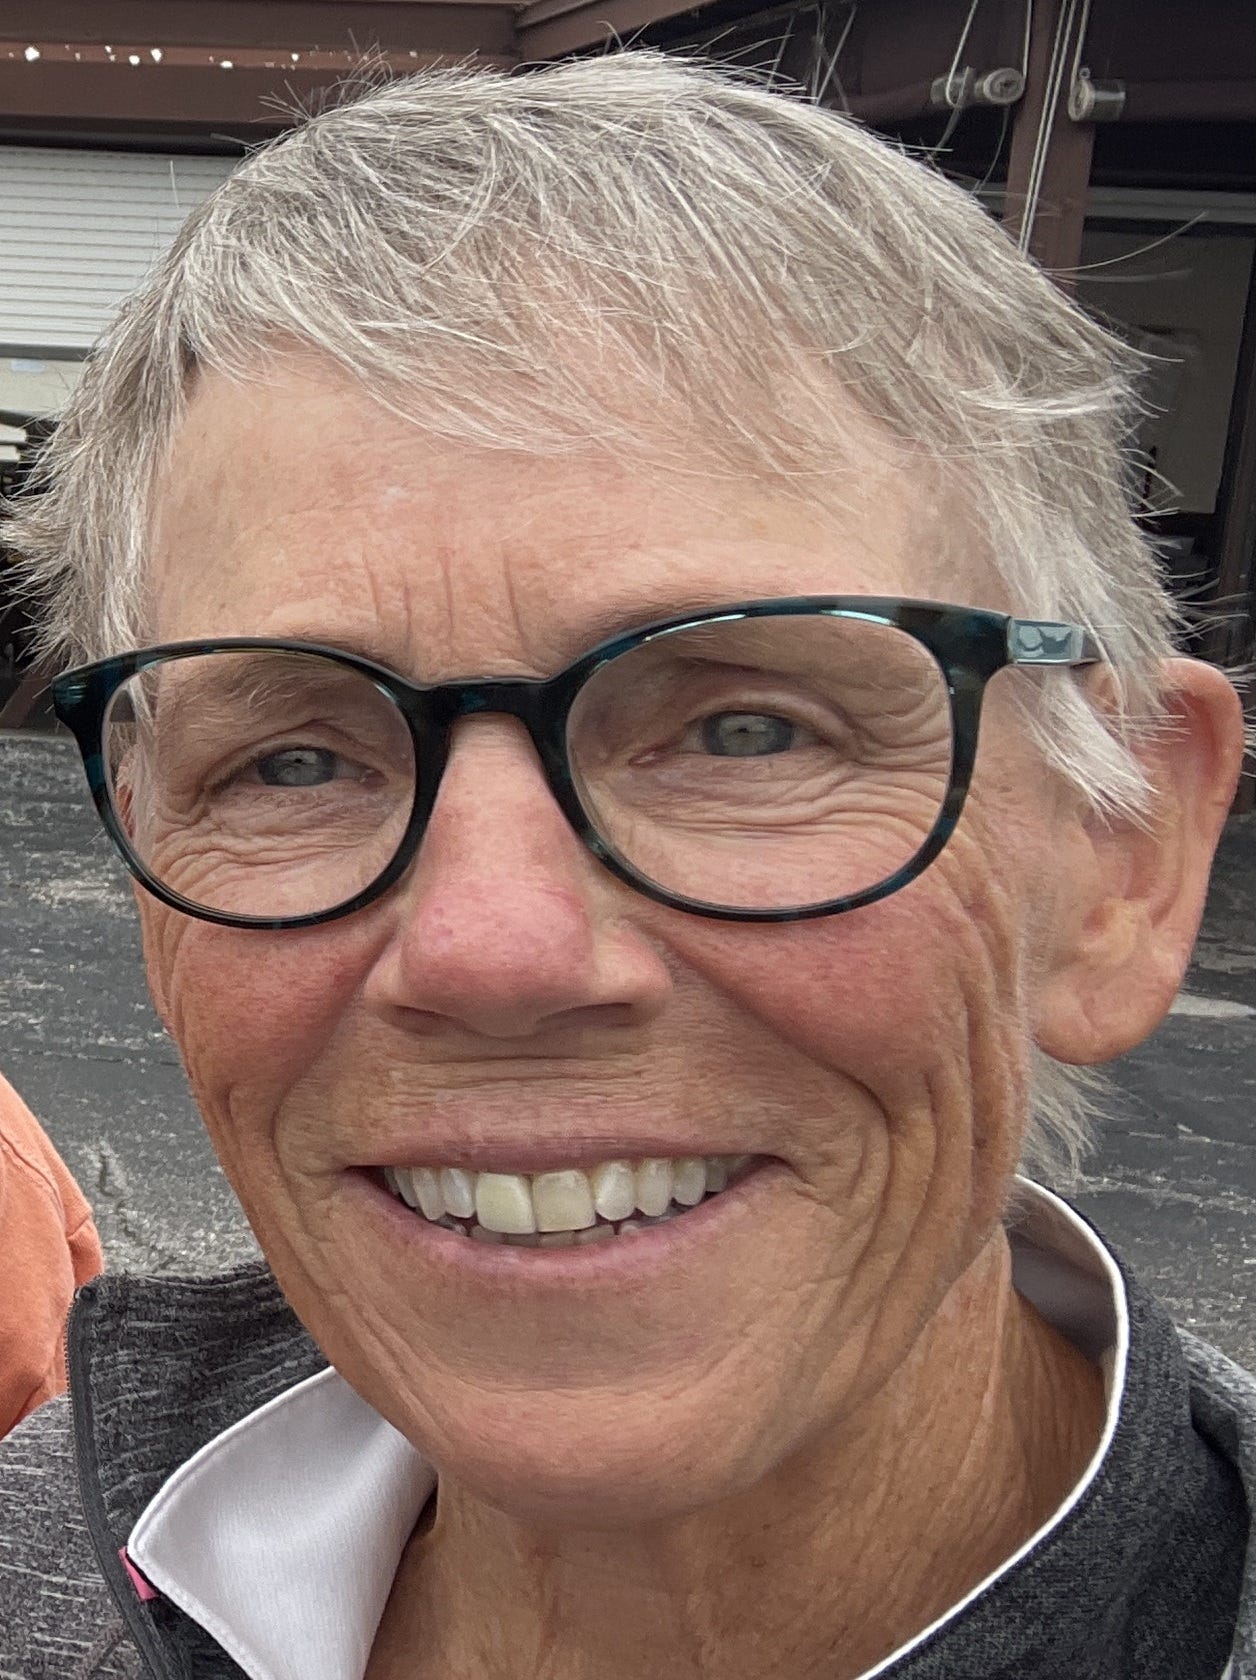 An elderly woman with short-cropped hair, glasses, and a big smile